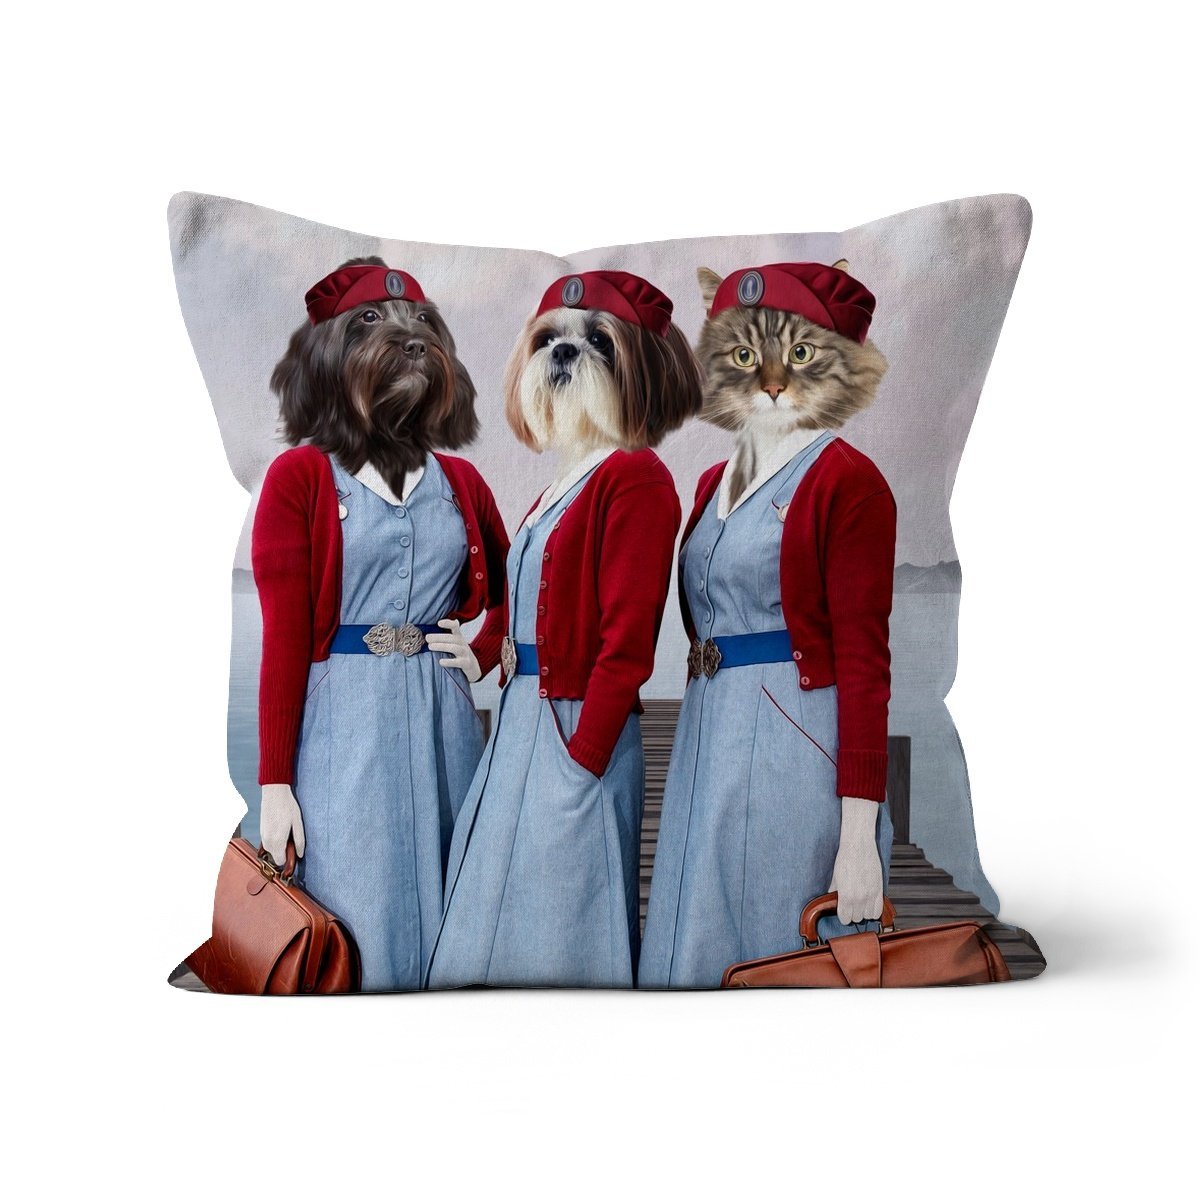 The Midwifes (Call The Midwife Inspired): Custom Pet Cushion - Paw & Glory - #pet portraits# - #dog portraits# - #pet portraits uk#paw & glory, pet portraits pillow,pillow personalized, pet face pillows, dog photo on pillow, pet custom pillow, pillows with dogs picture